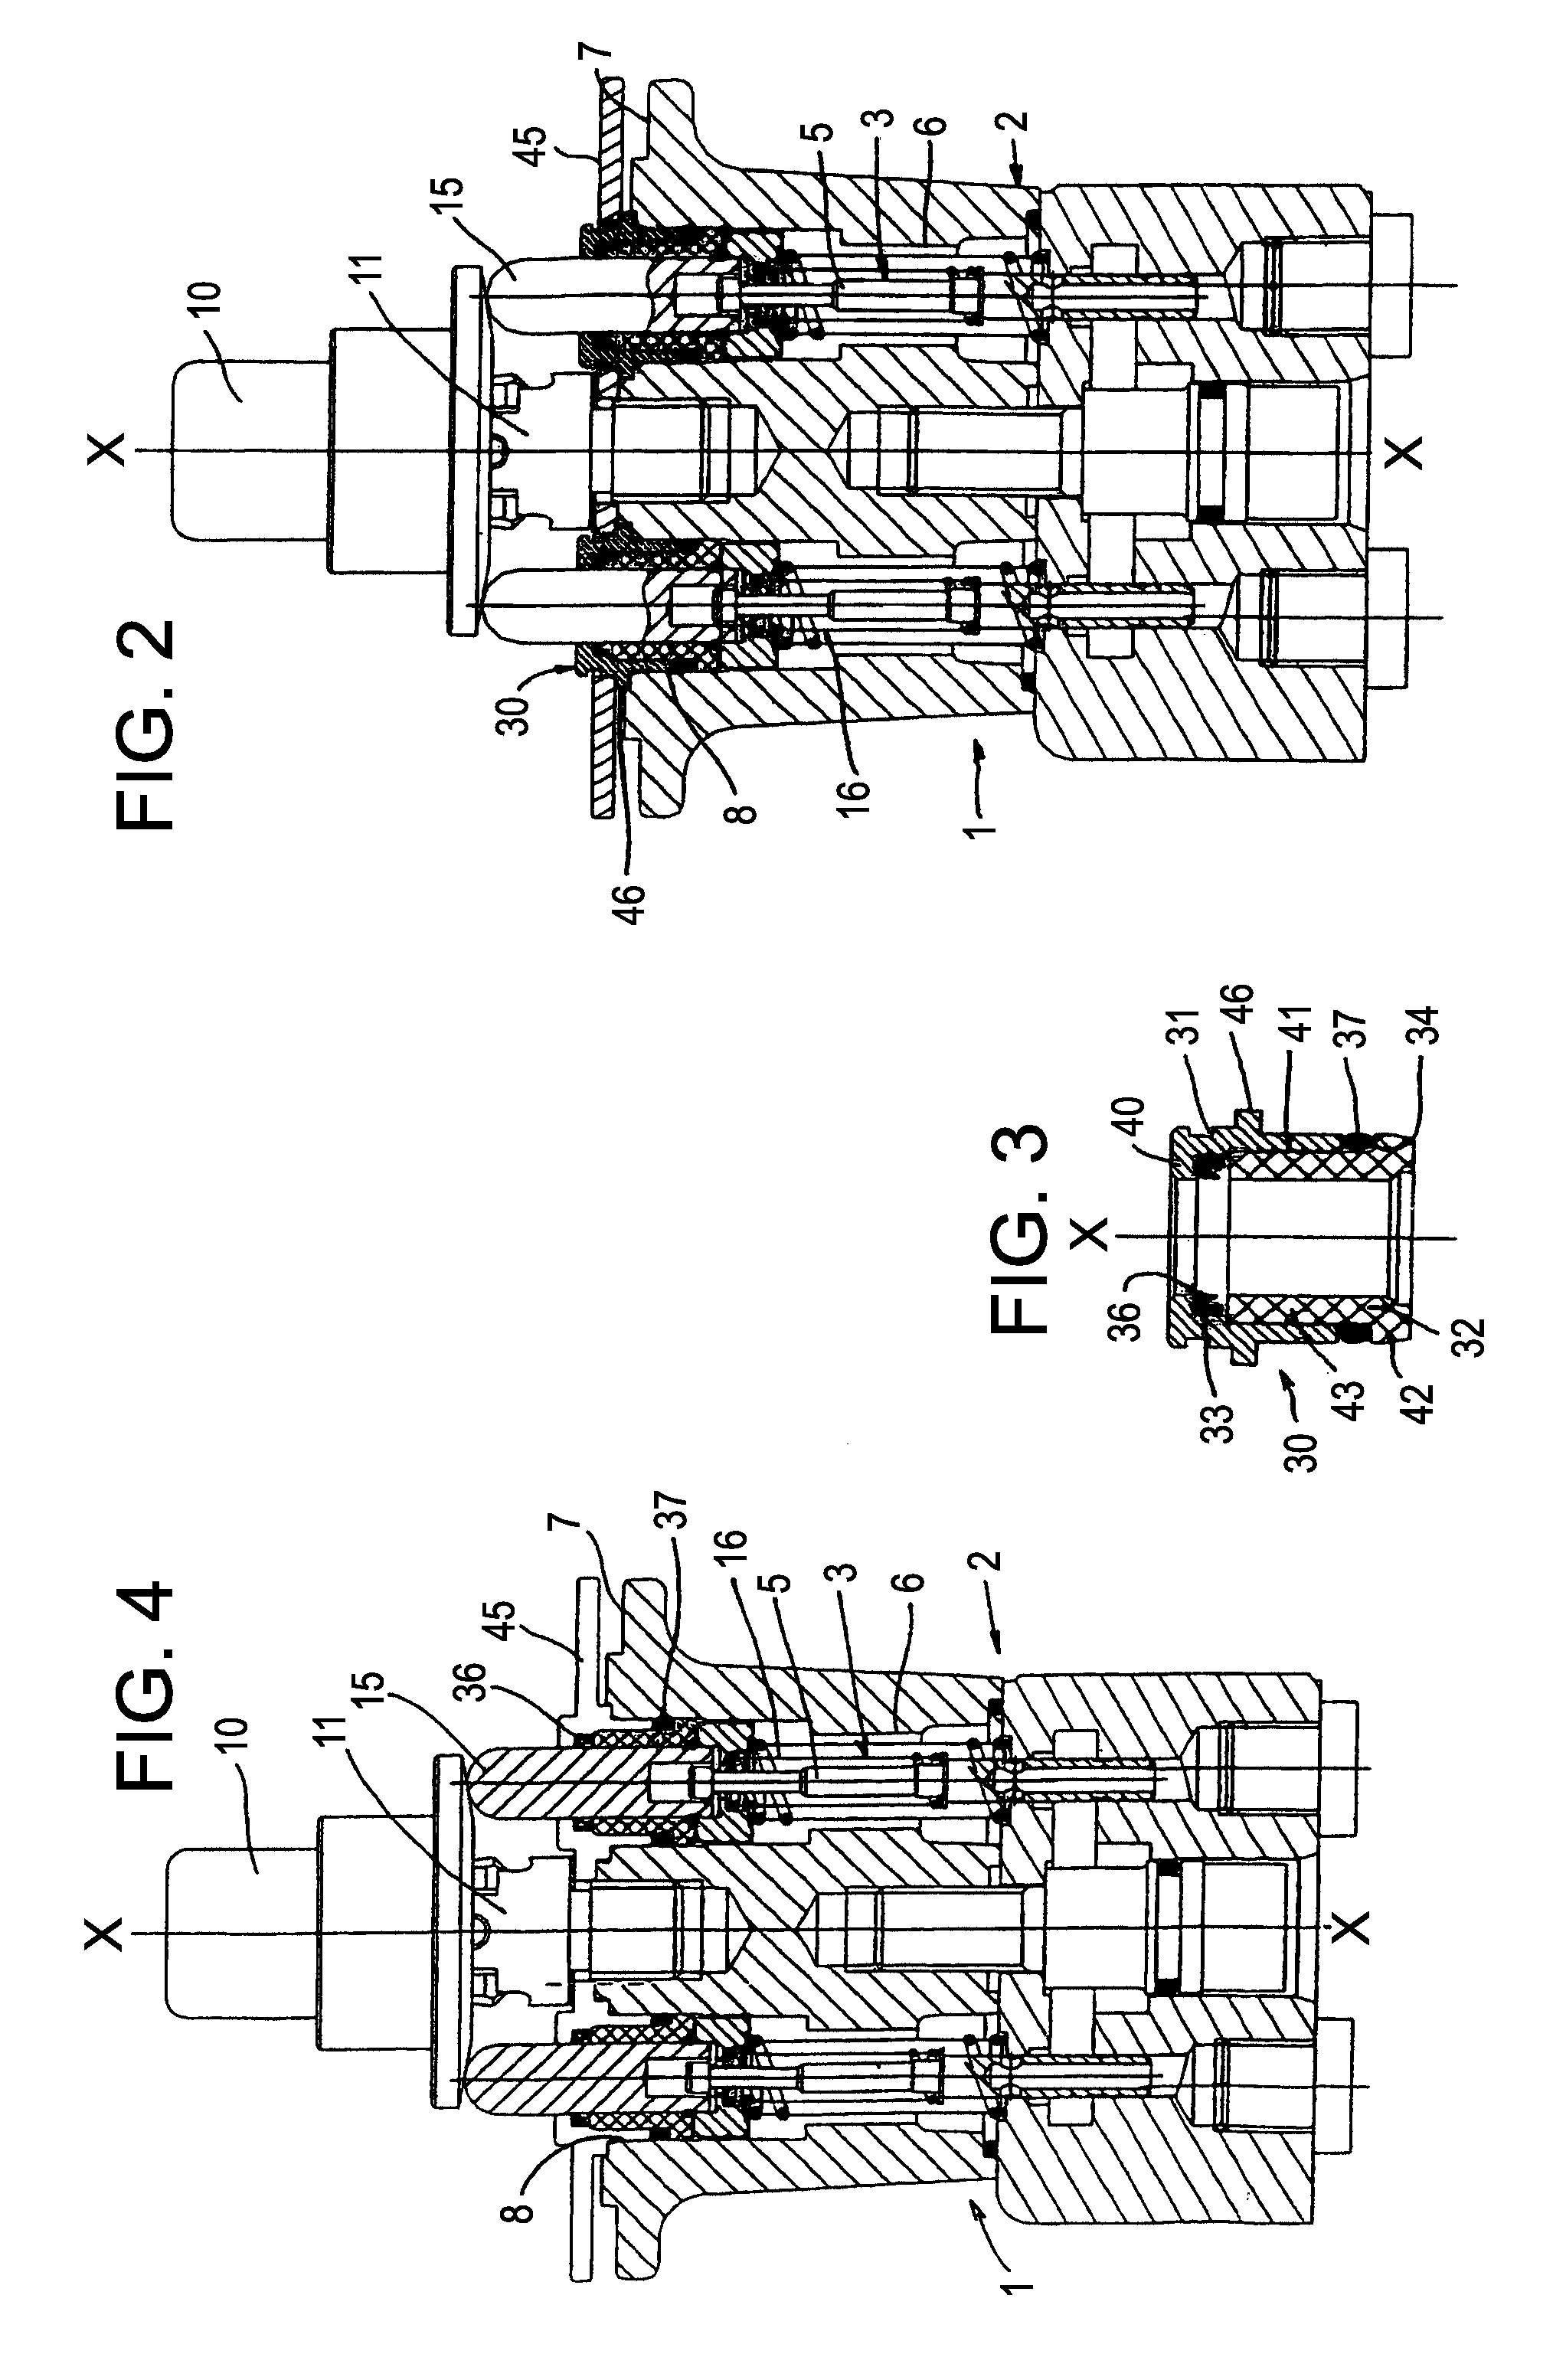 Double-guided pressurized fluid distributor